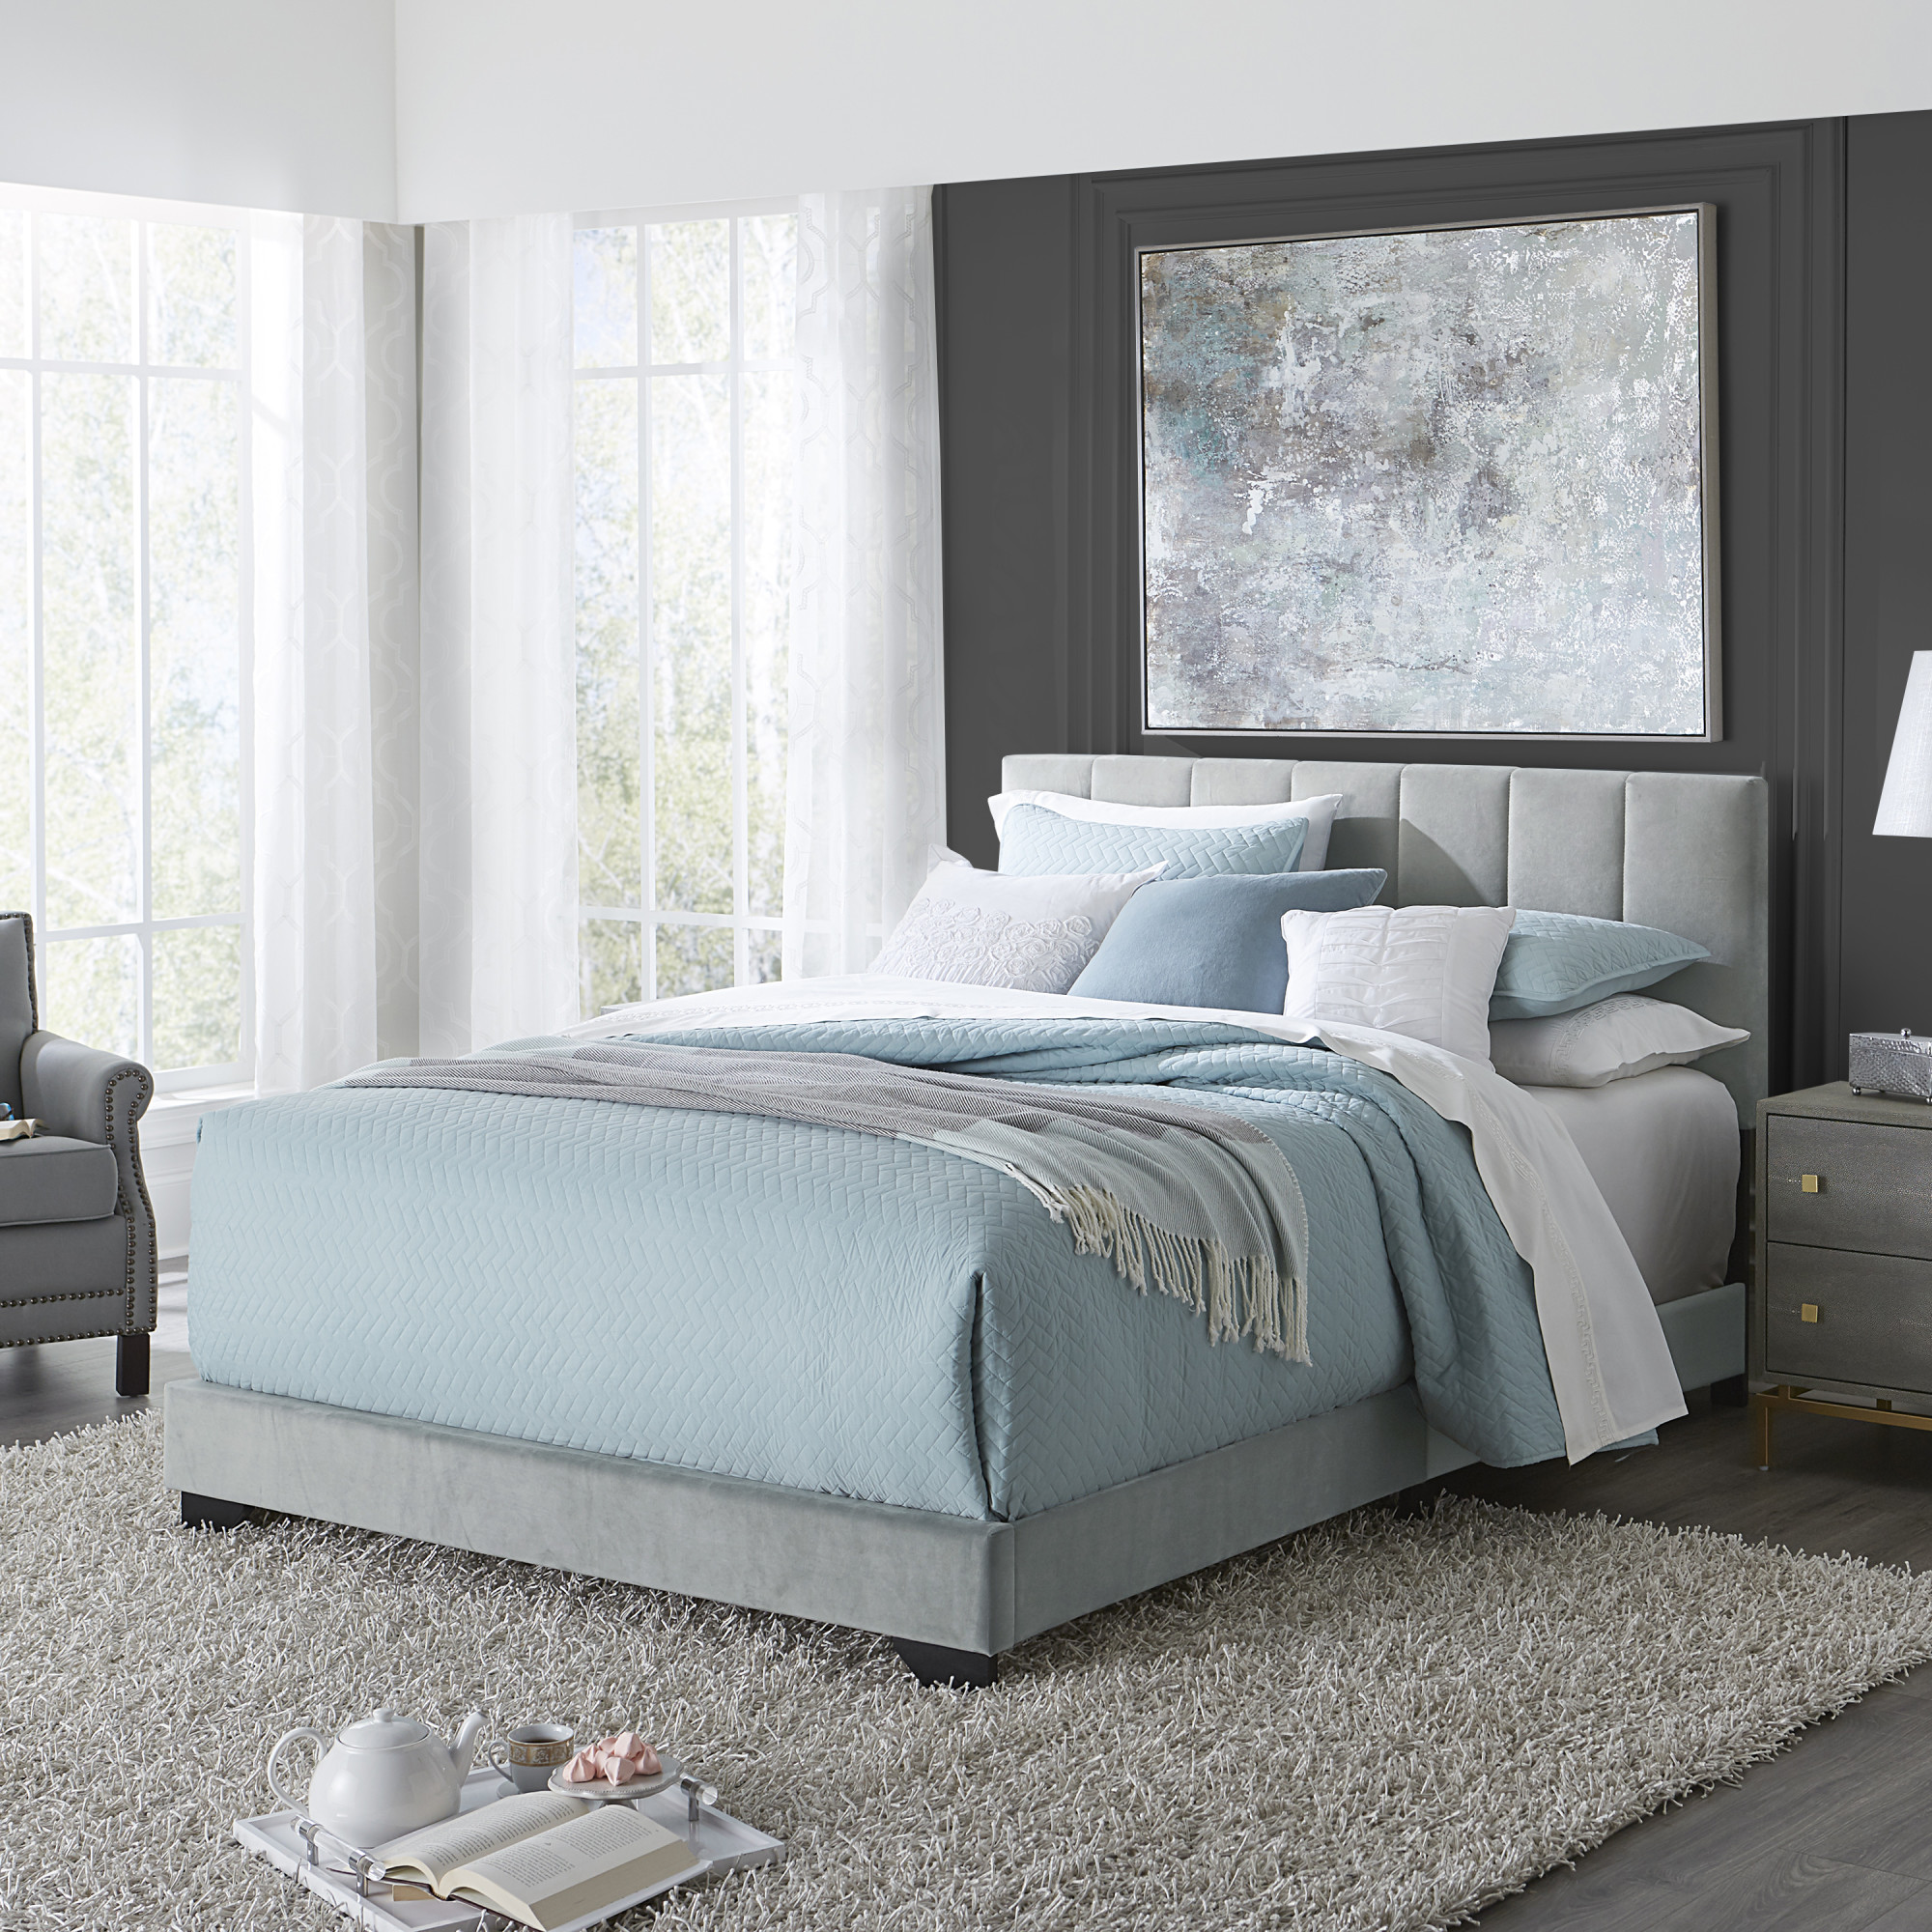 Reece Channel Stitched Upholstered Queen Bed, Platinum Gray, by Hillsdale Living Essentials - image 1 of 14